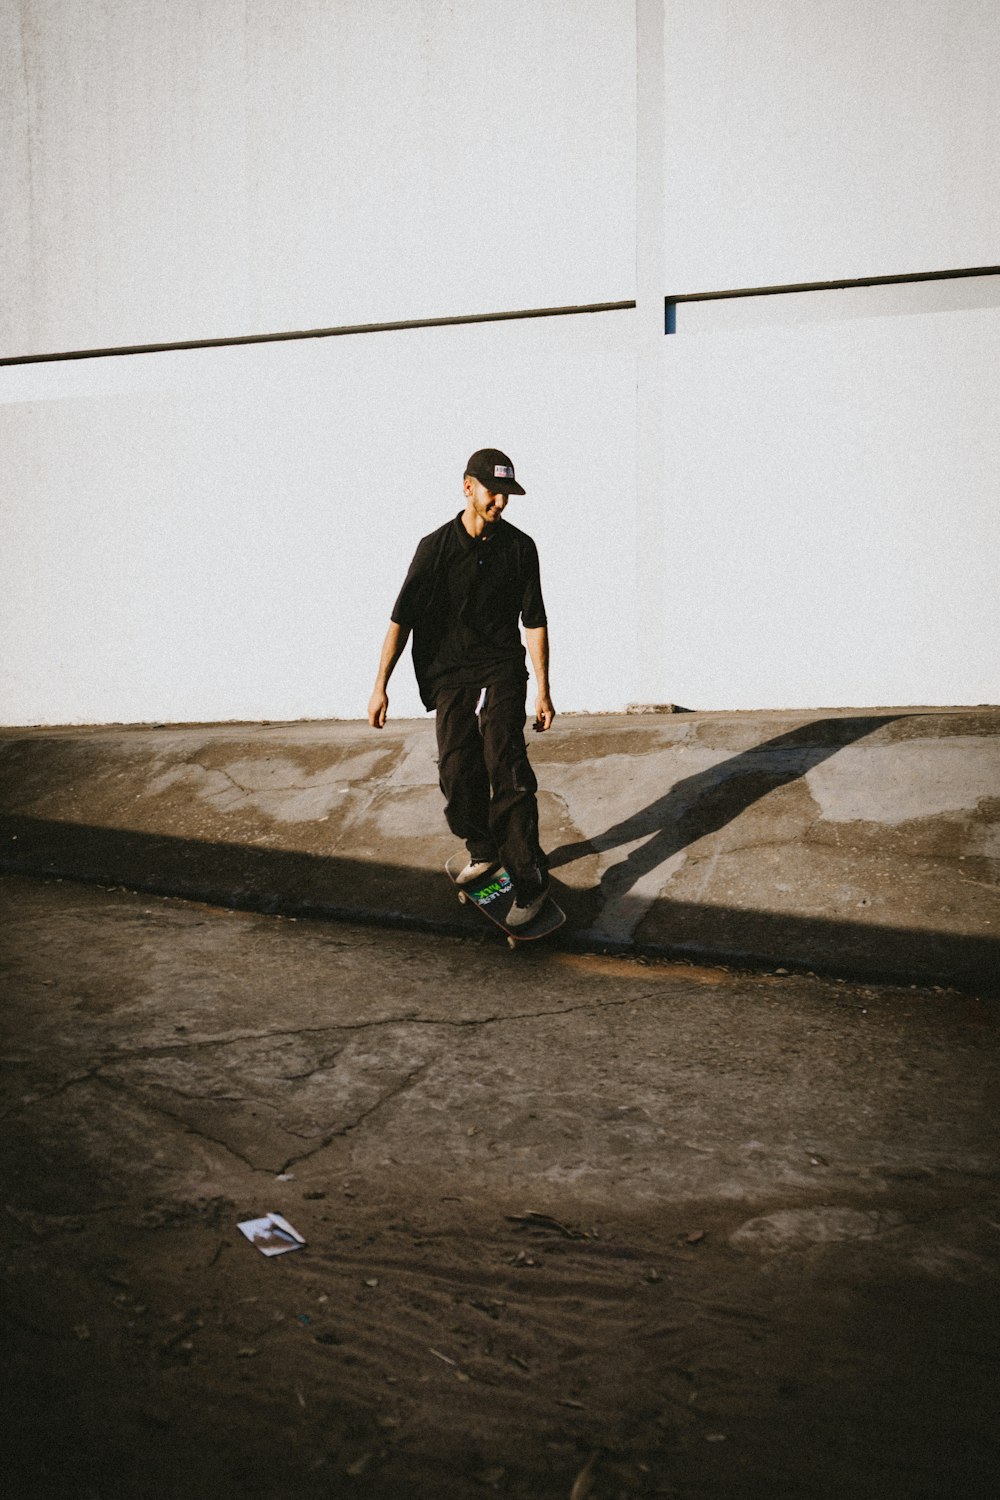 a man riding a skateboard down the side of a road